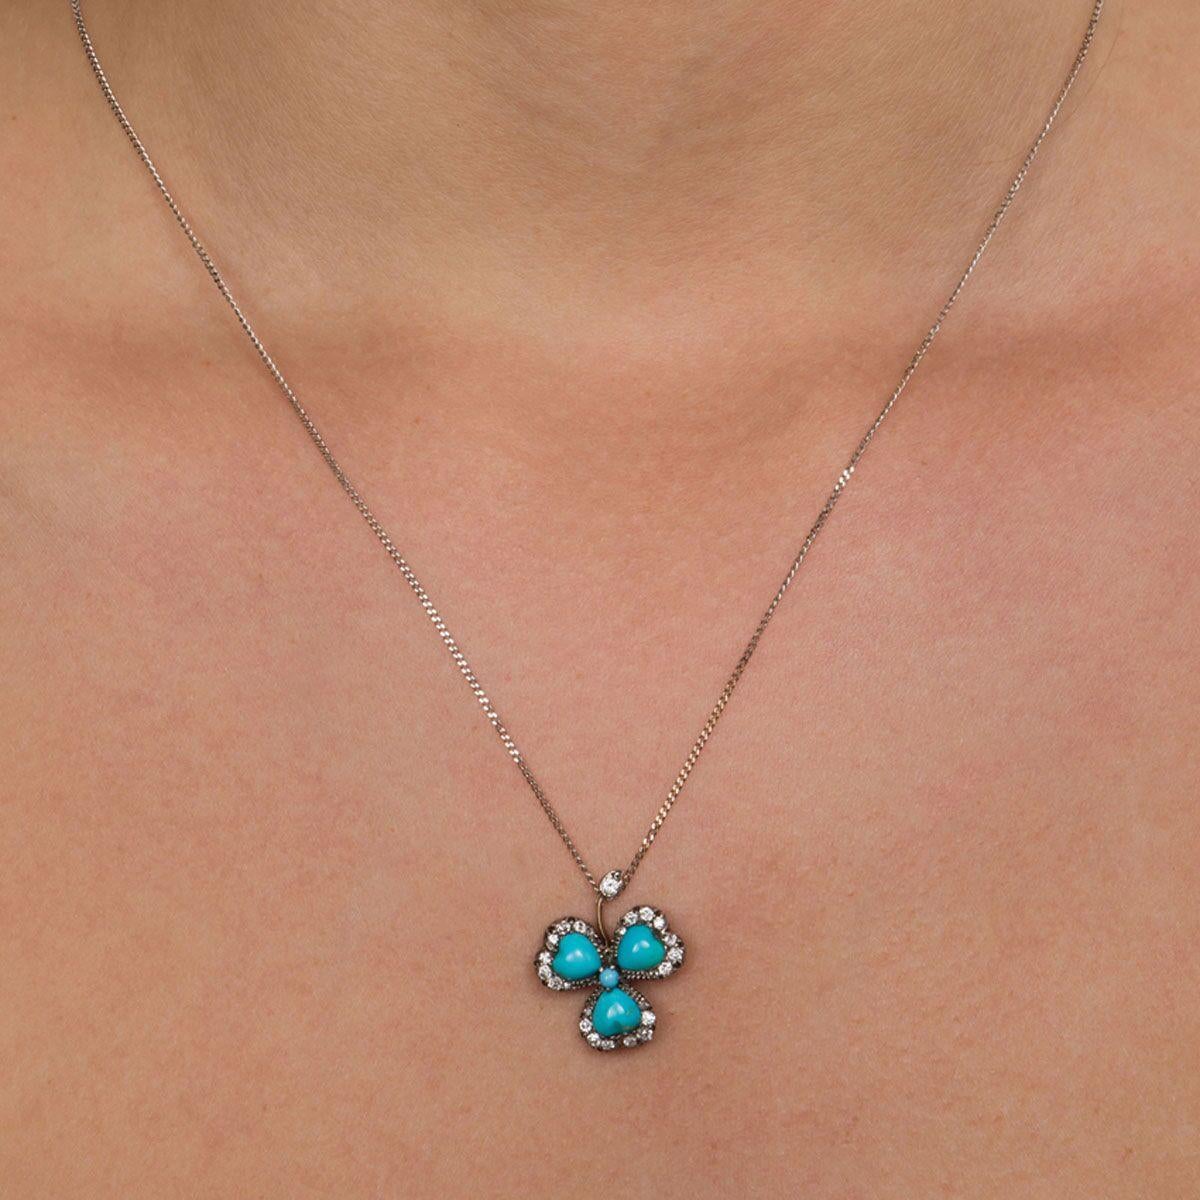 Turquoise and Old Cut Diamond Three-Leaf Clover Pendant Necklace 1